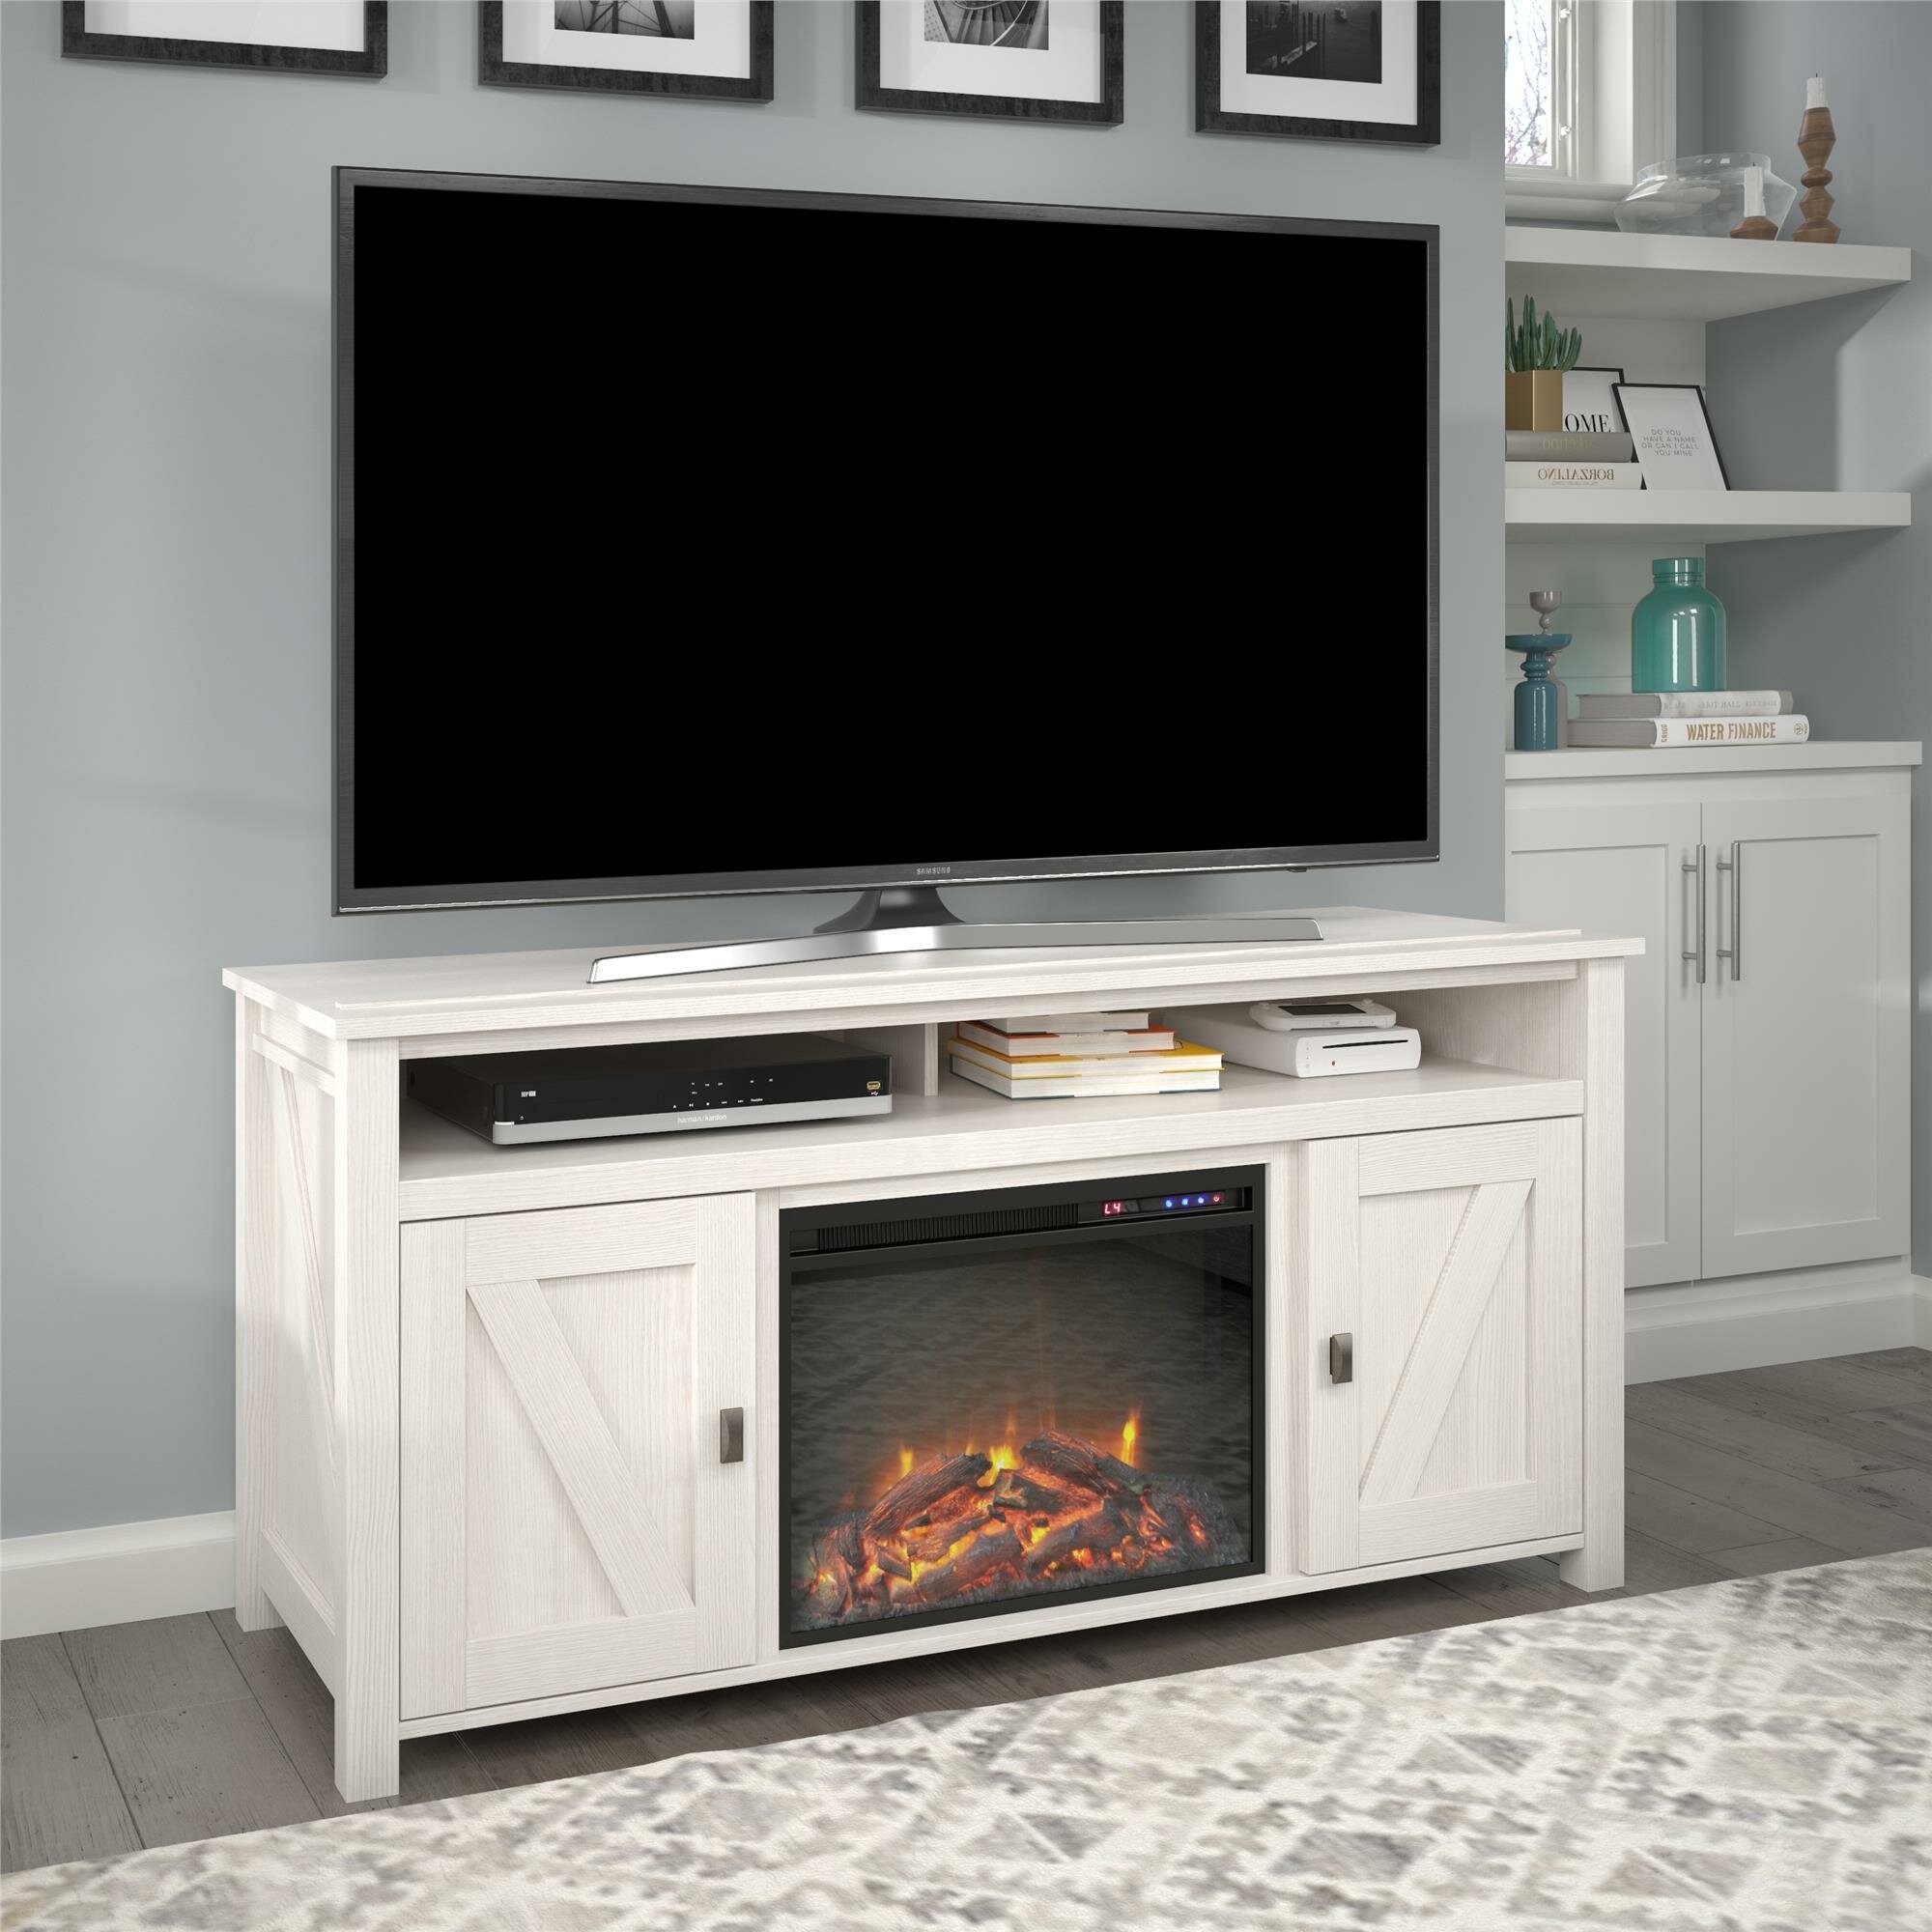 Whittier TV Stand for TVs up to 60" with Electric Fireplace Included